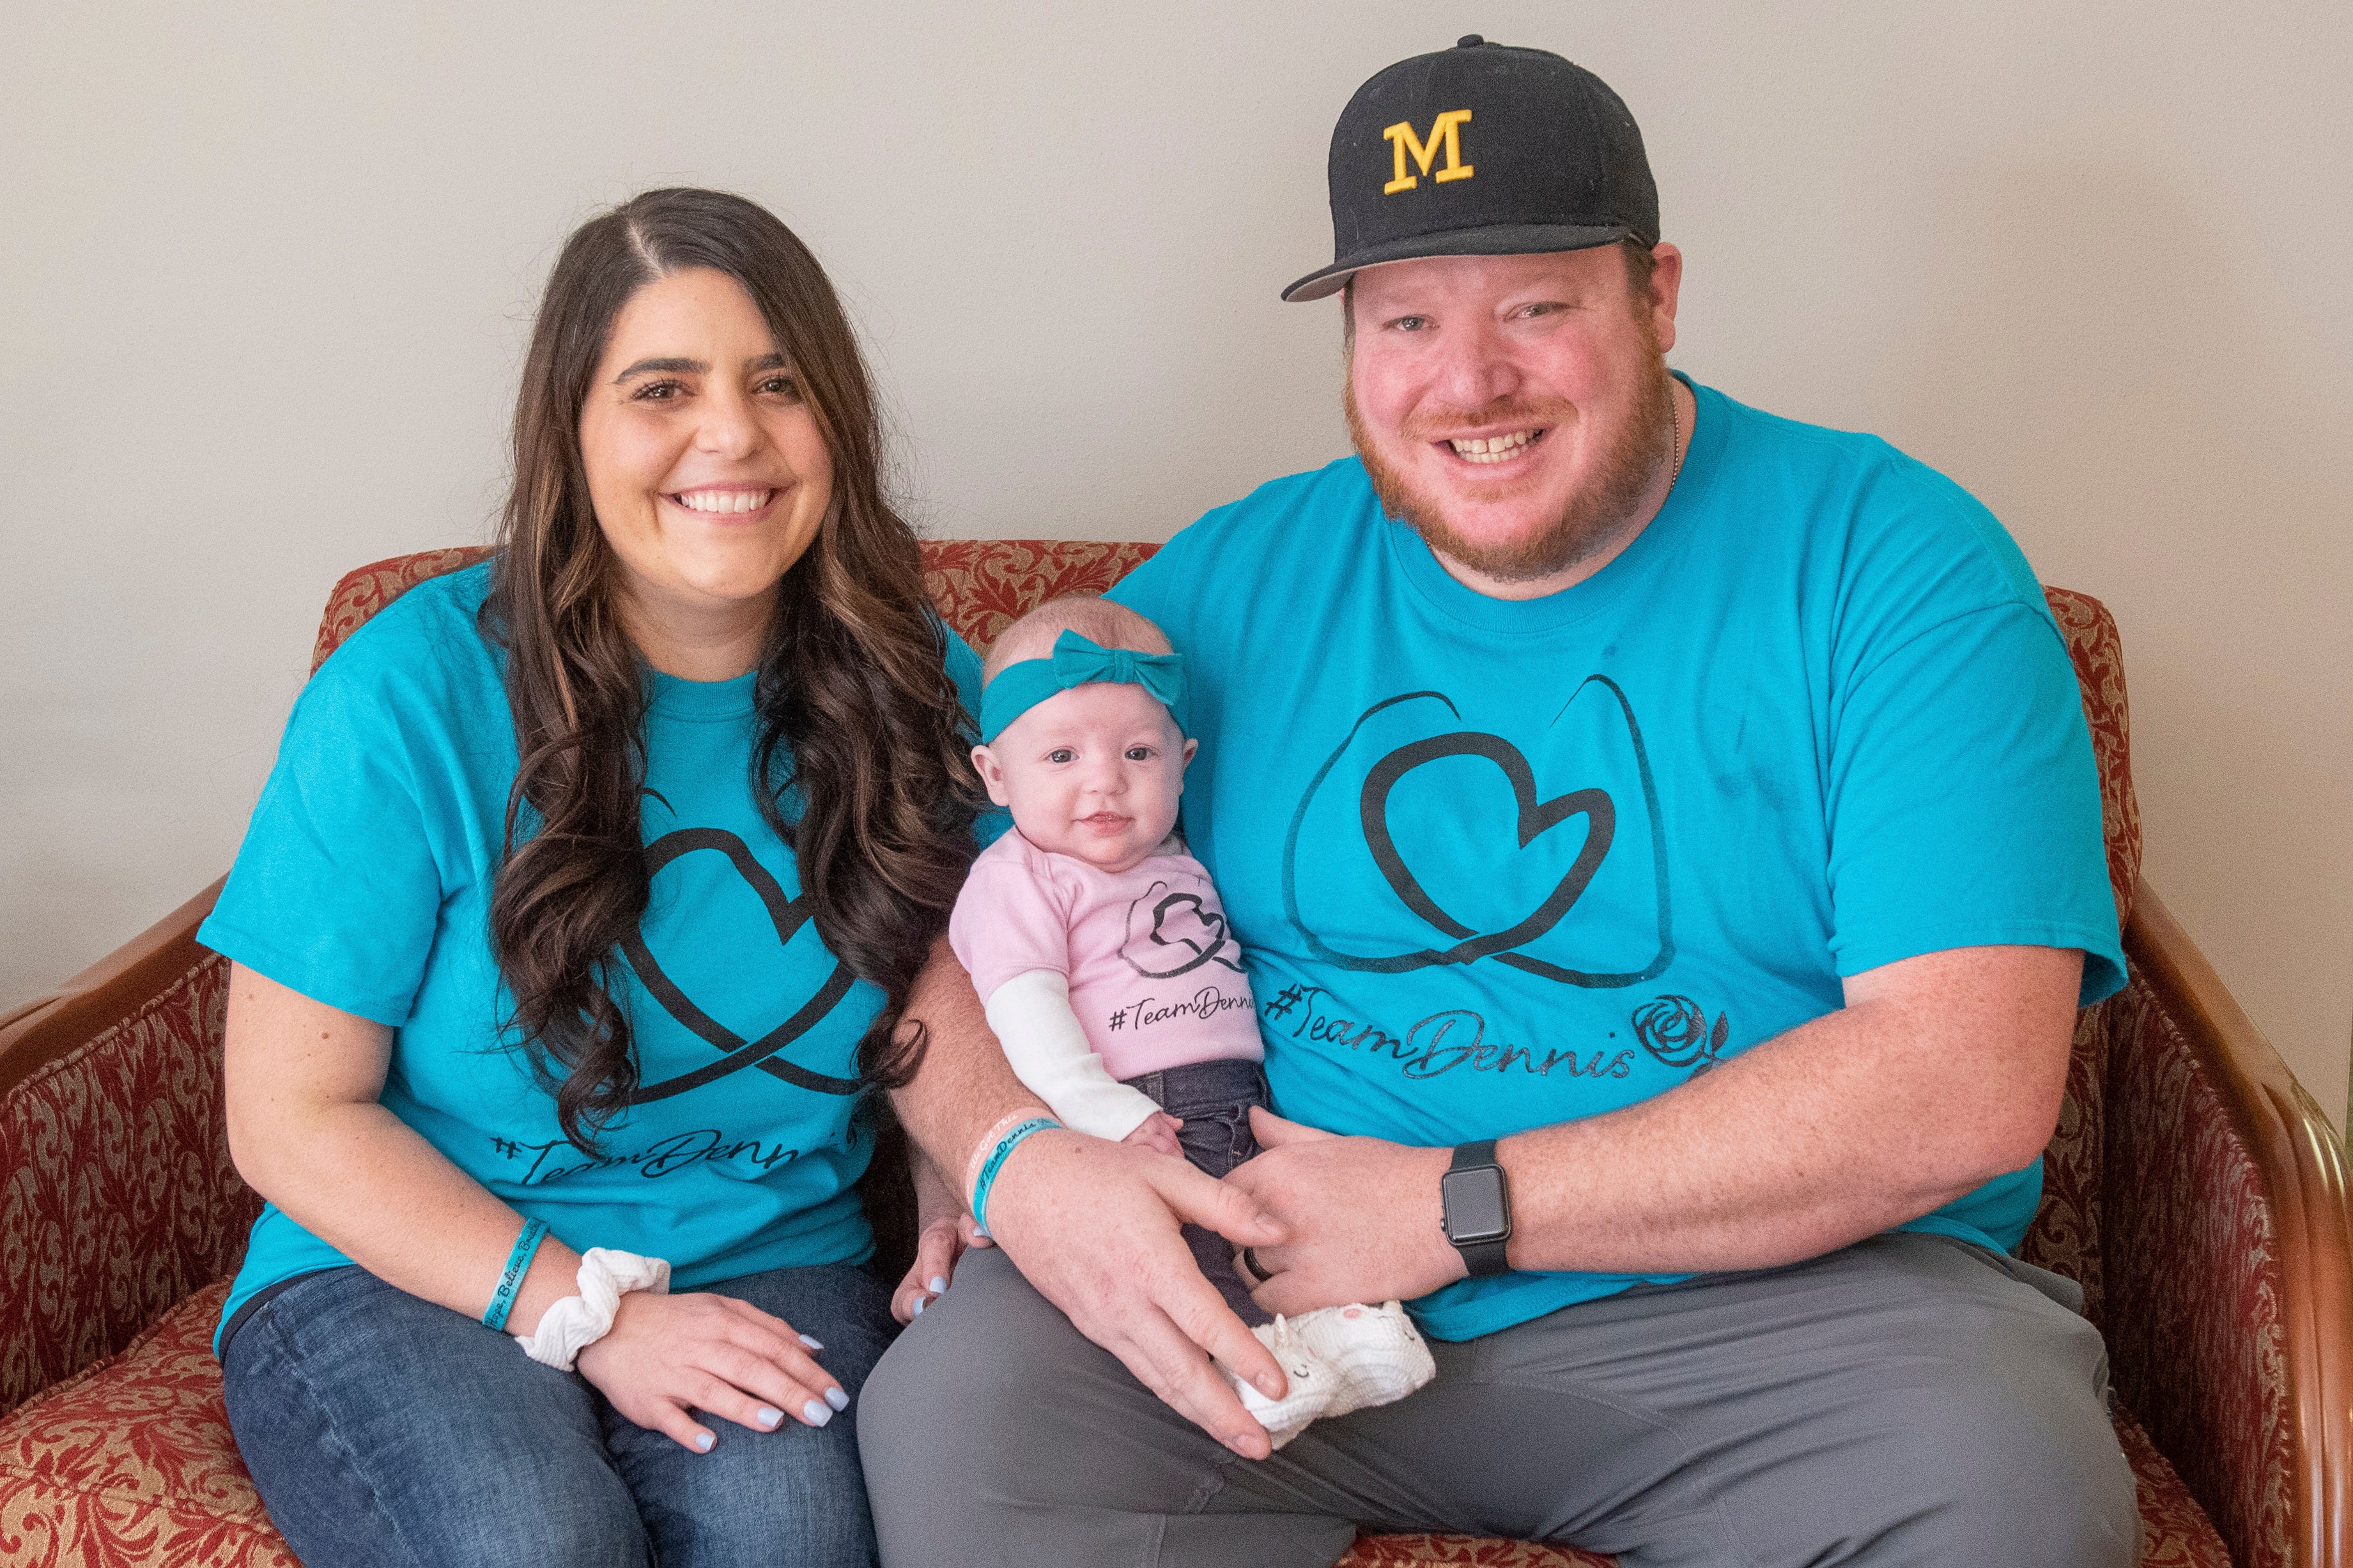 Woman with coronavirus gives birth, gains new lungs